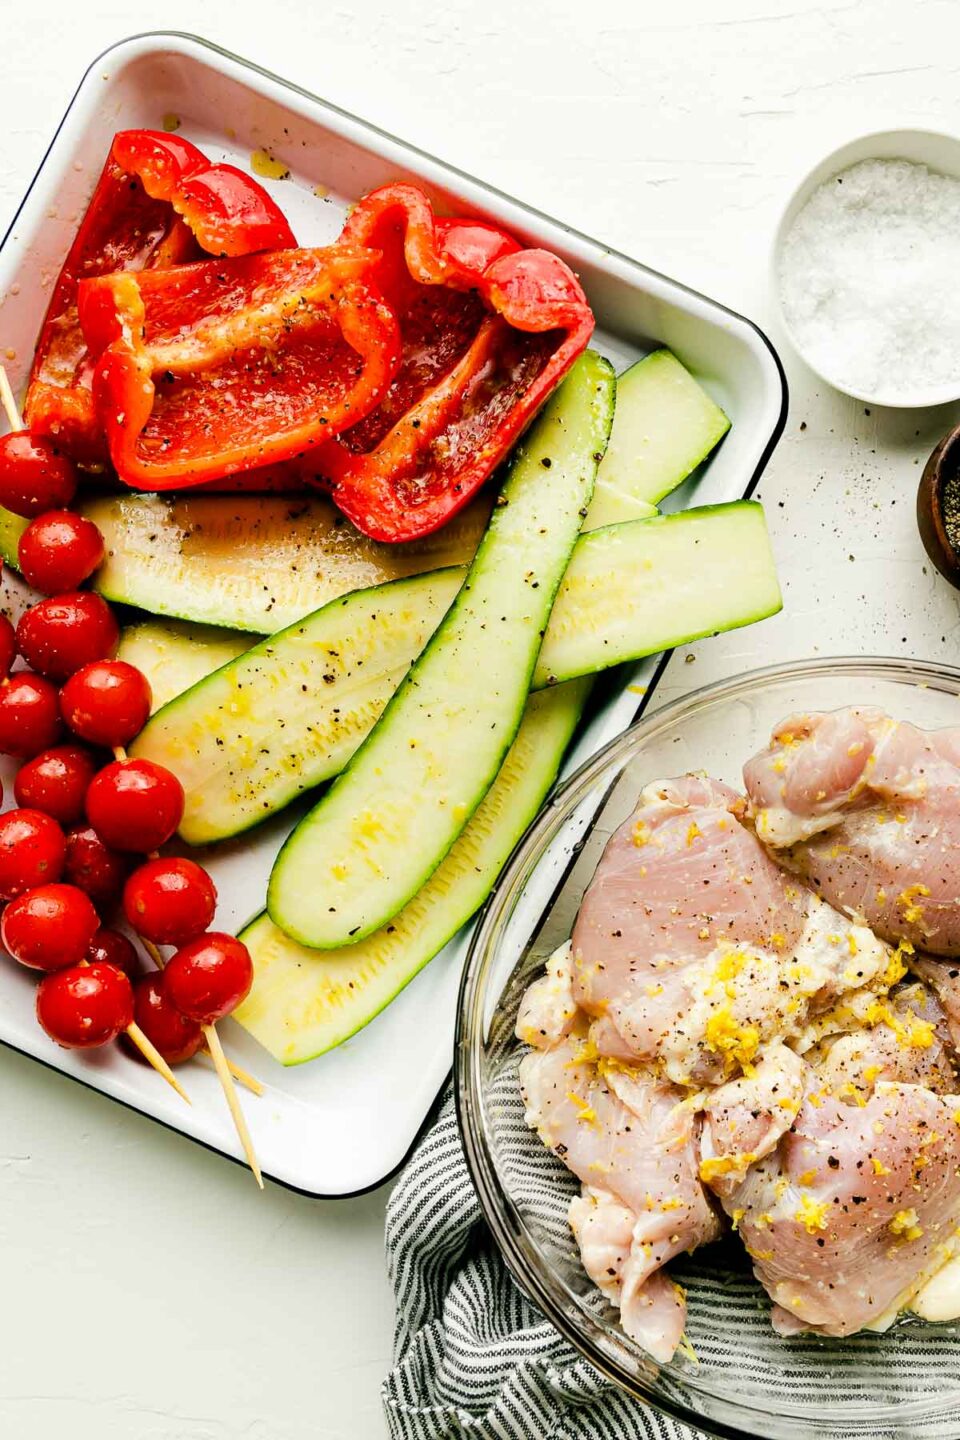 A baking dish with ready-to-grill zucchini, red peppers and skewers of tomatoes, and a bowl of marinated chicken thighs sit atop a white surface. Small bowls of salt and pepper sit alongside them.